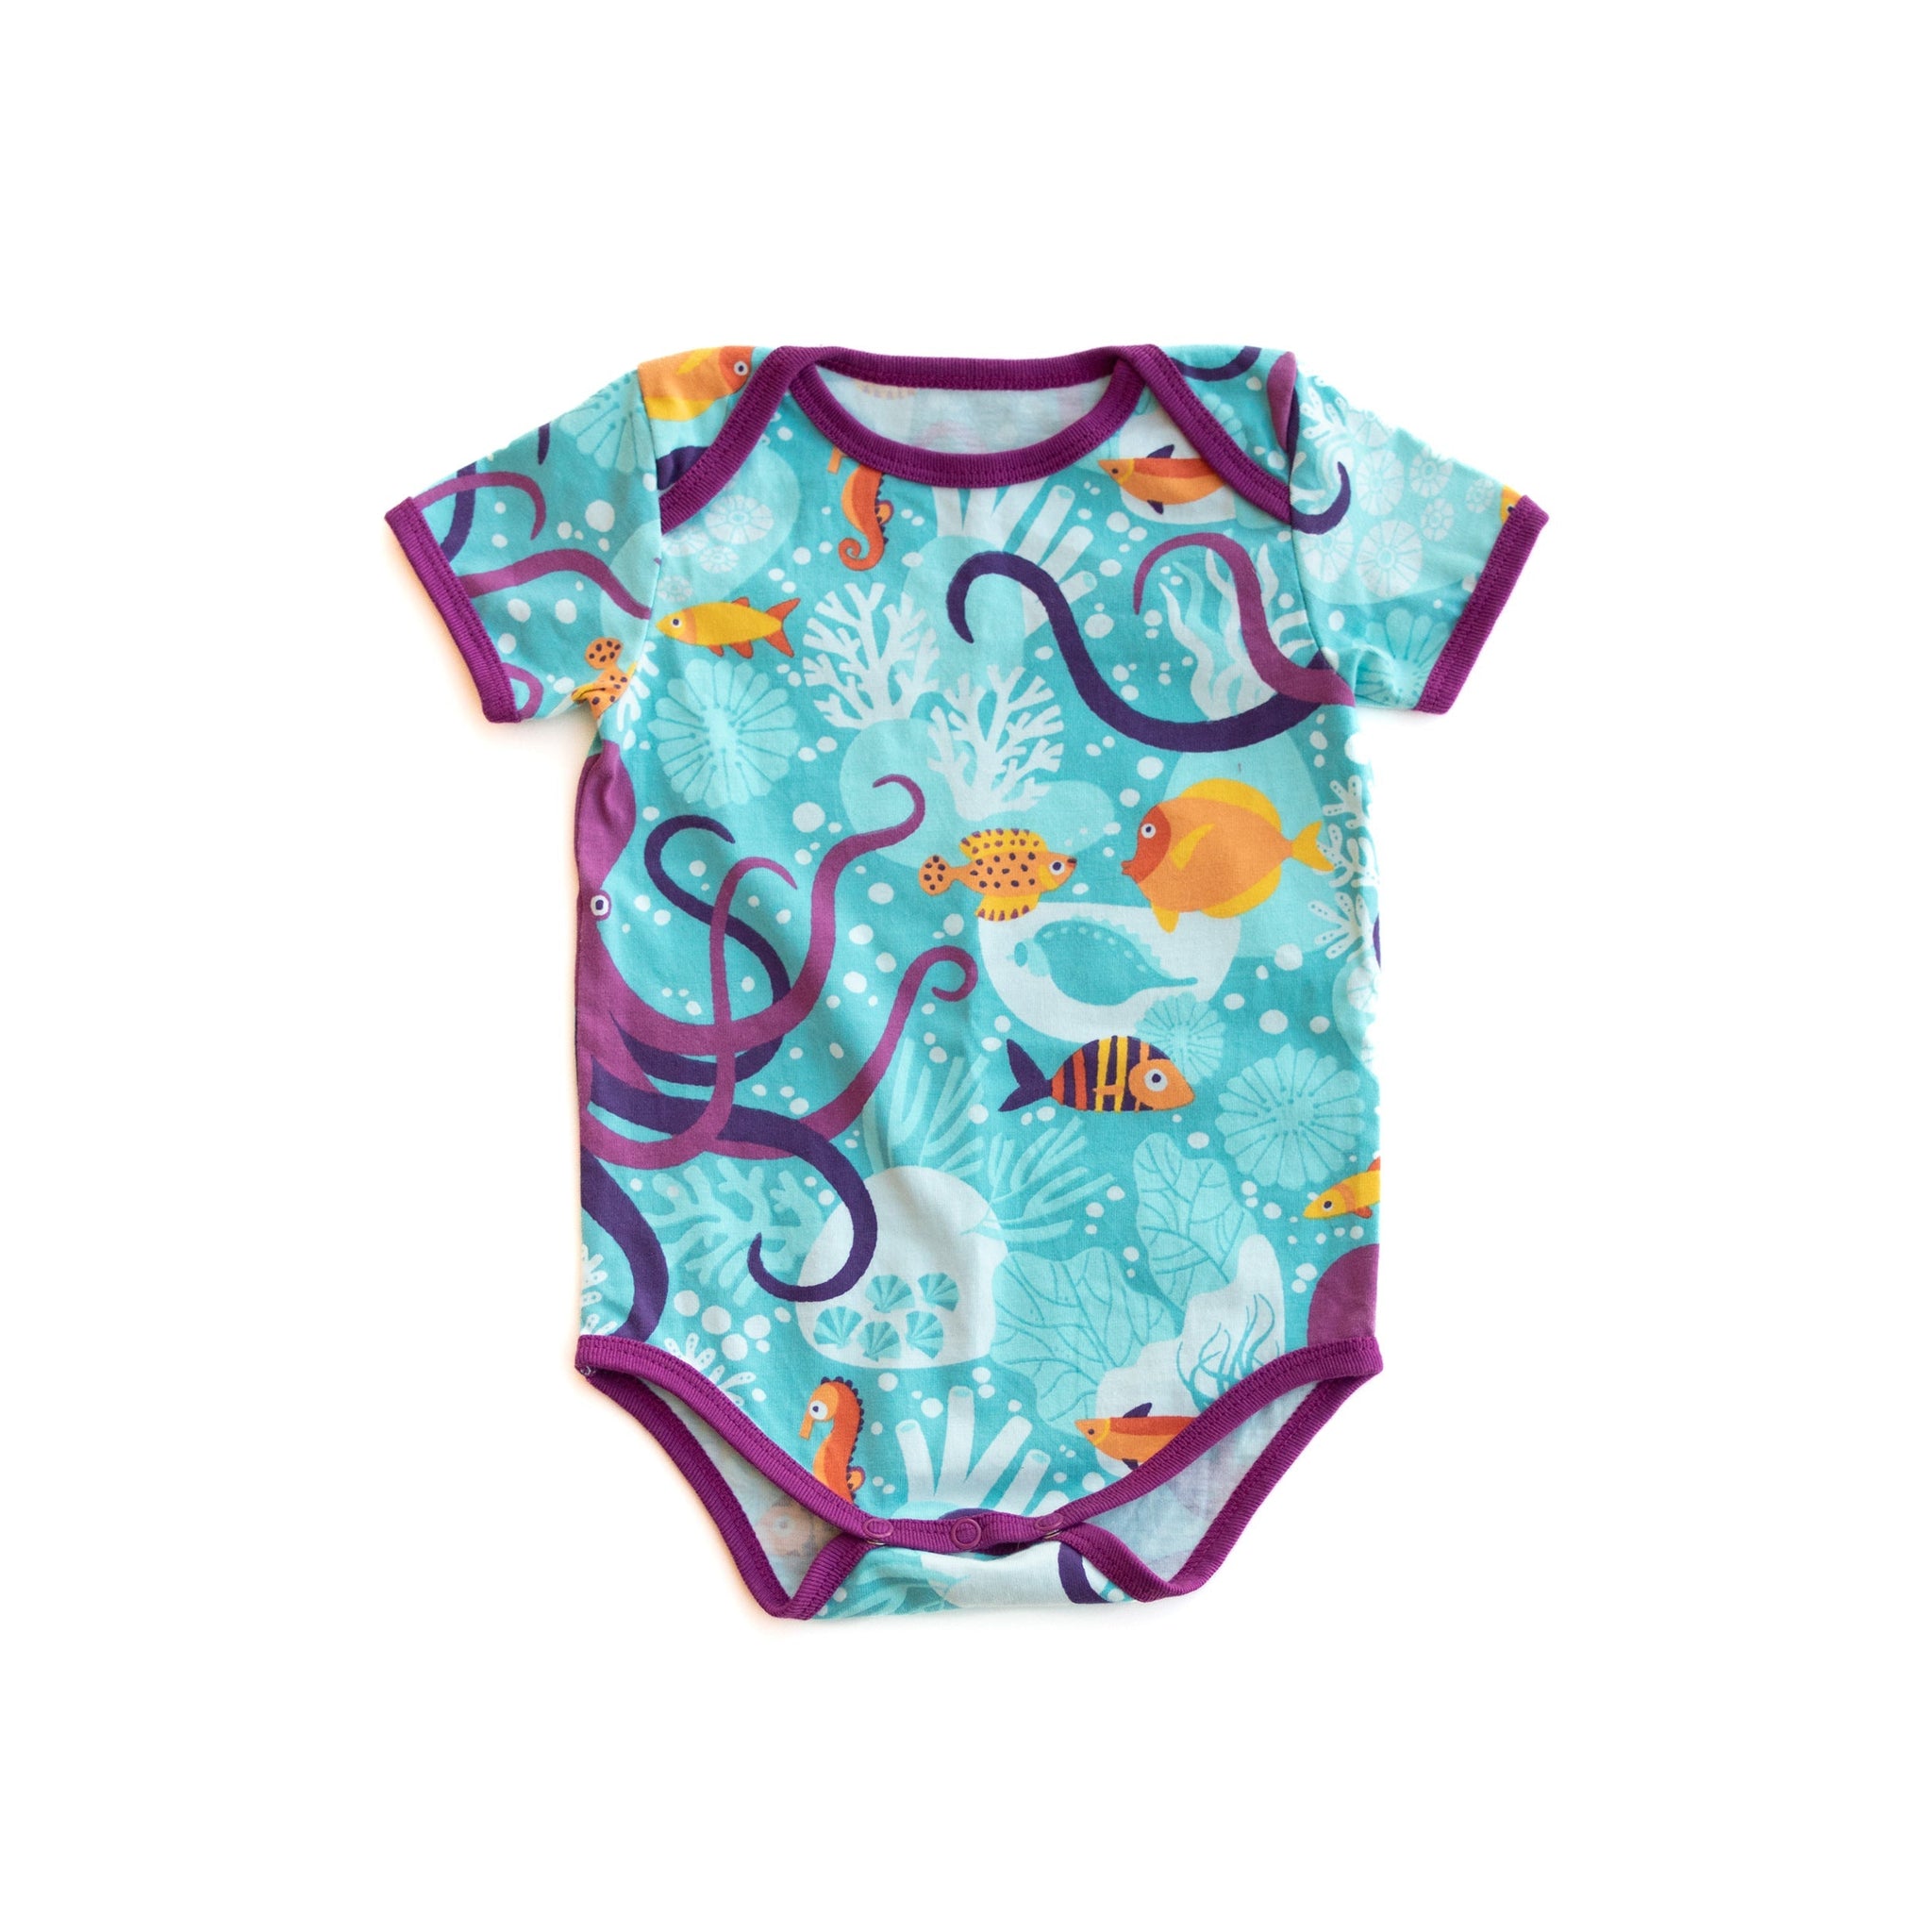 Merle - Under the Sea Short Sleeved Body Top